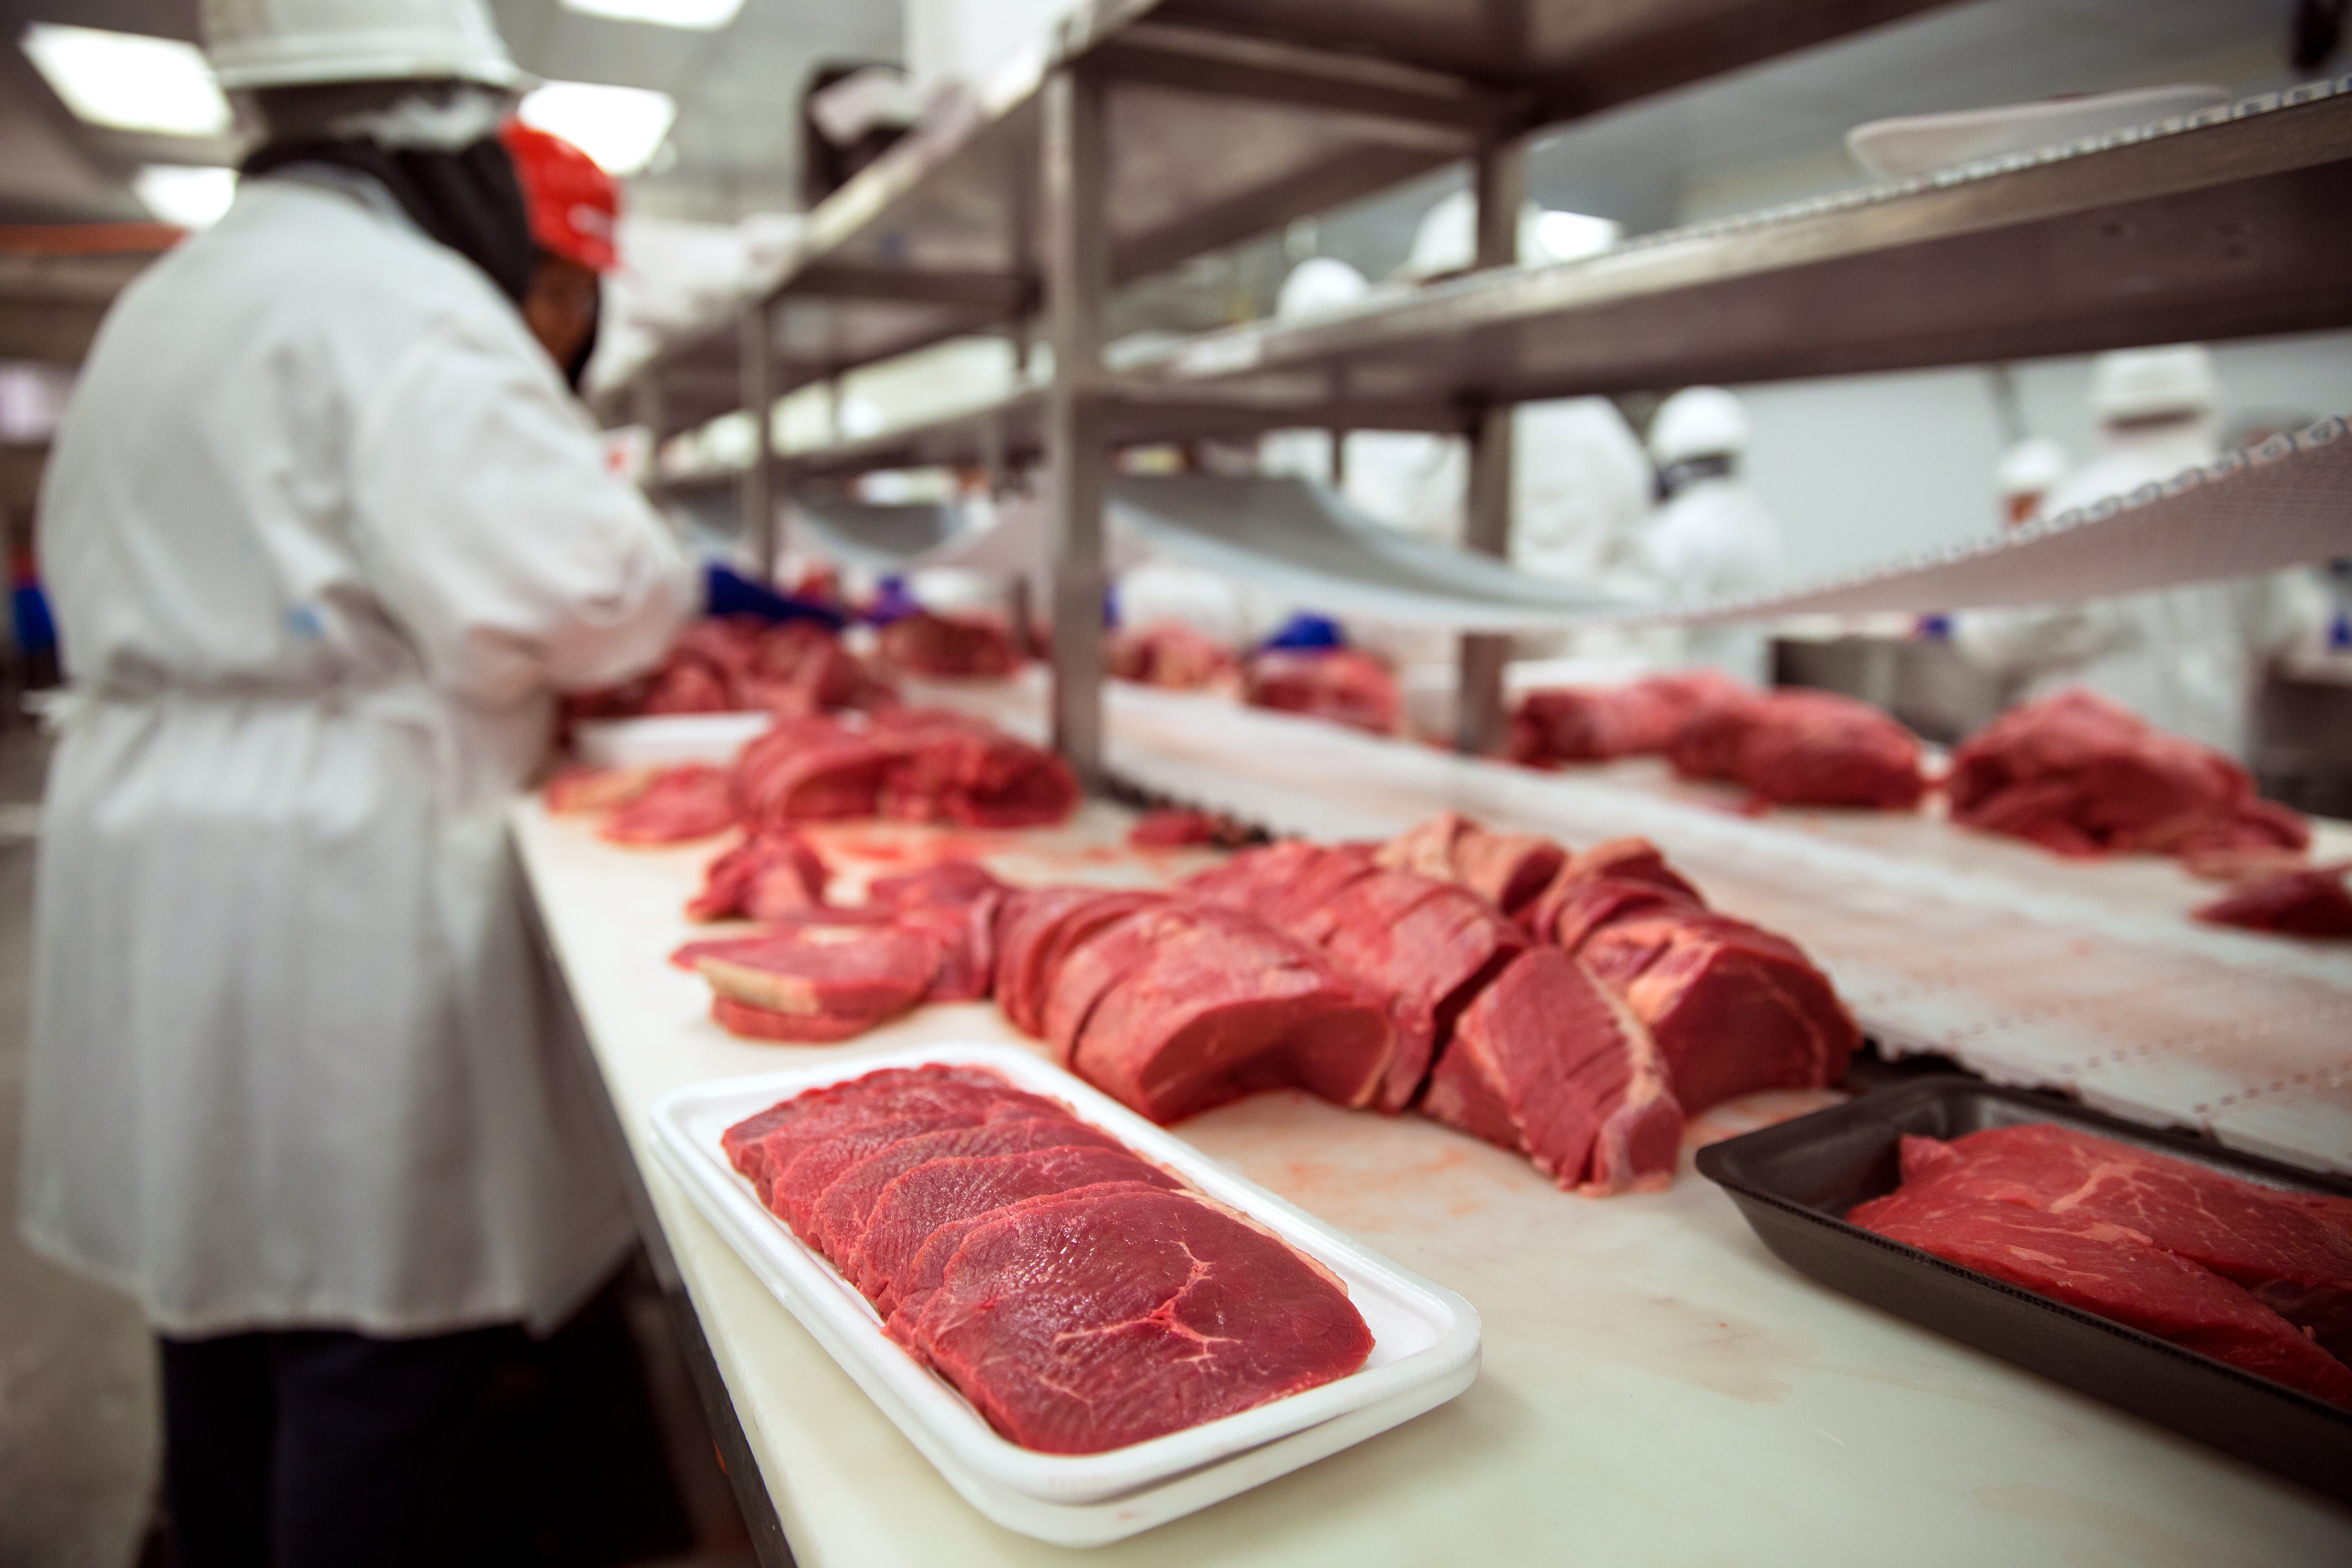 Raw beef before being packaged | Source: Shutterstock